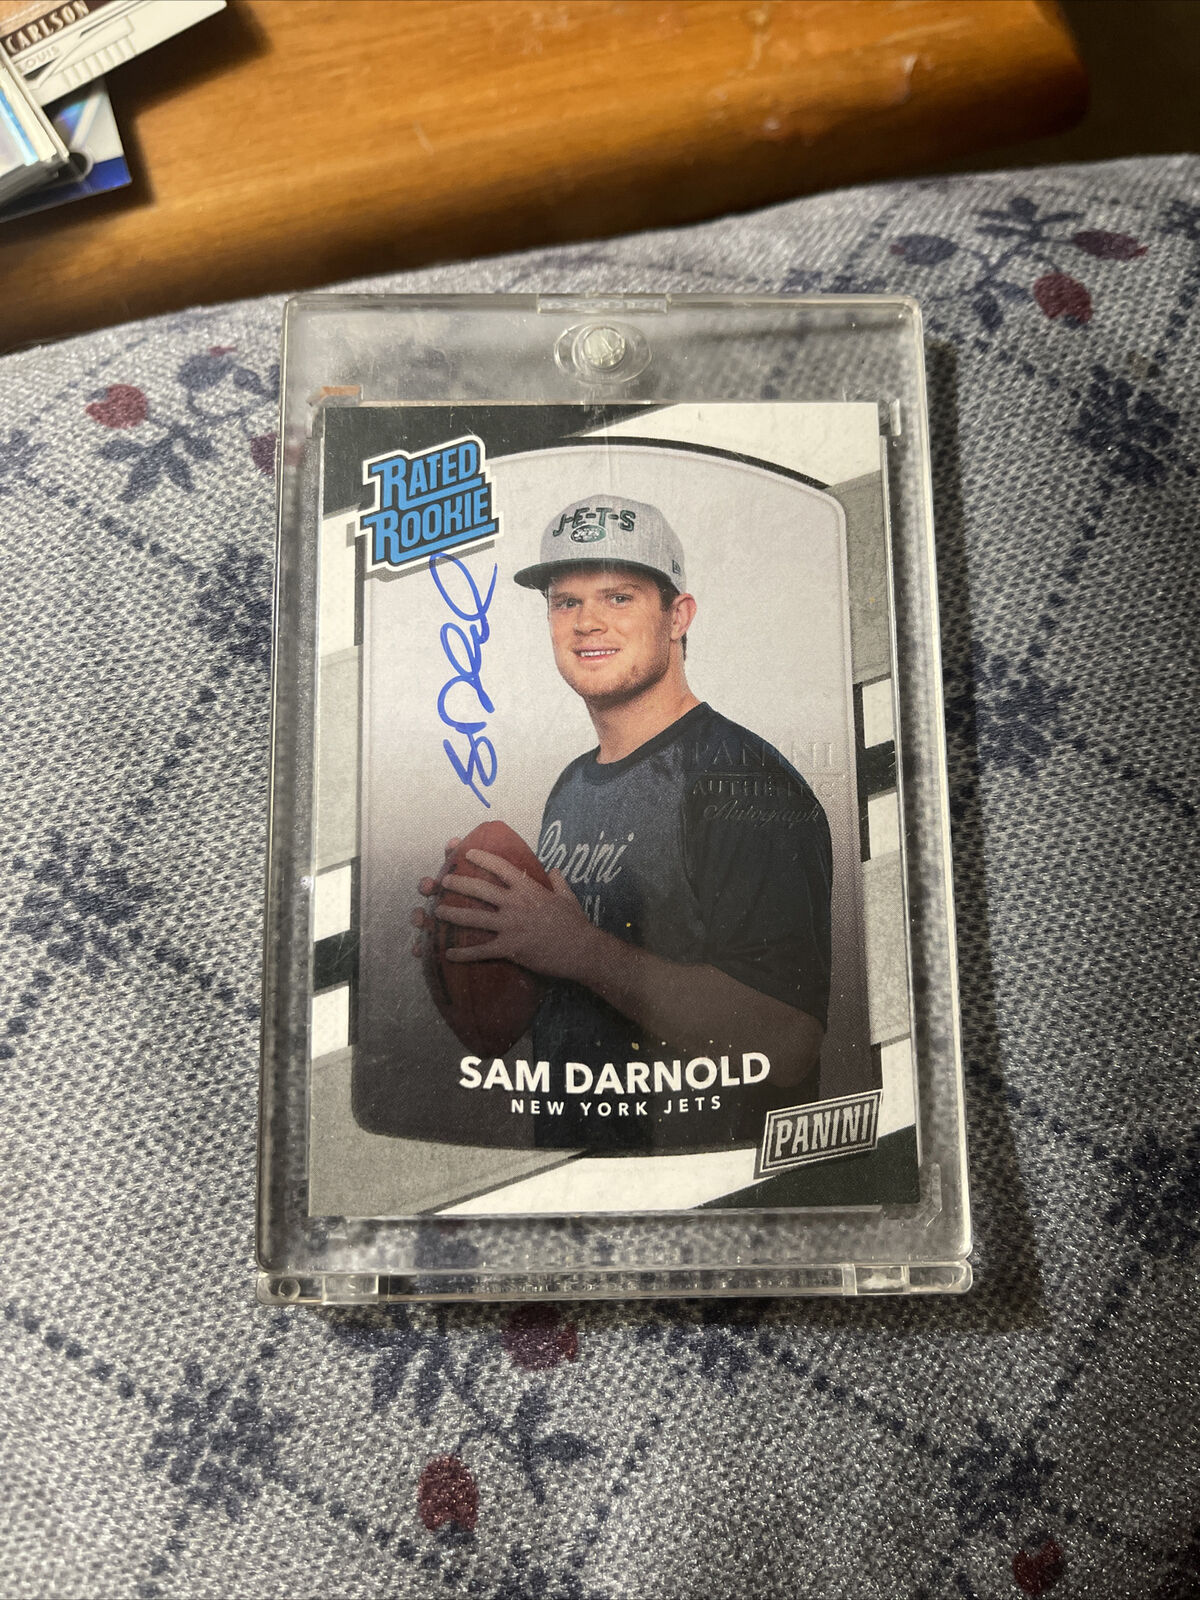 SAM DARNOLD 2018 Panini NEXT DAY RATED ROOKIE On Card AUTO RC PANTHERS